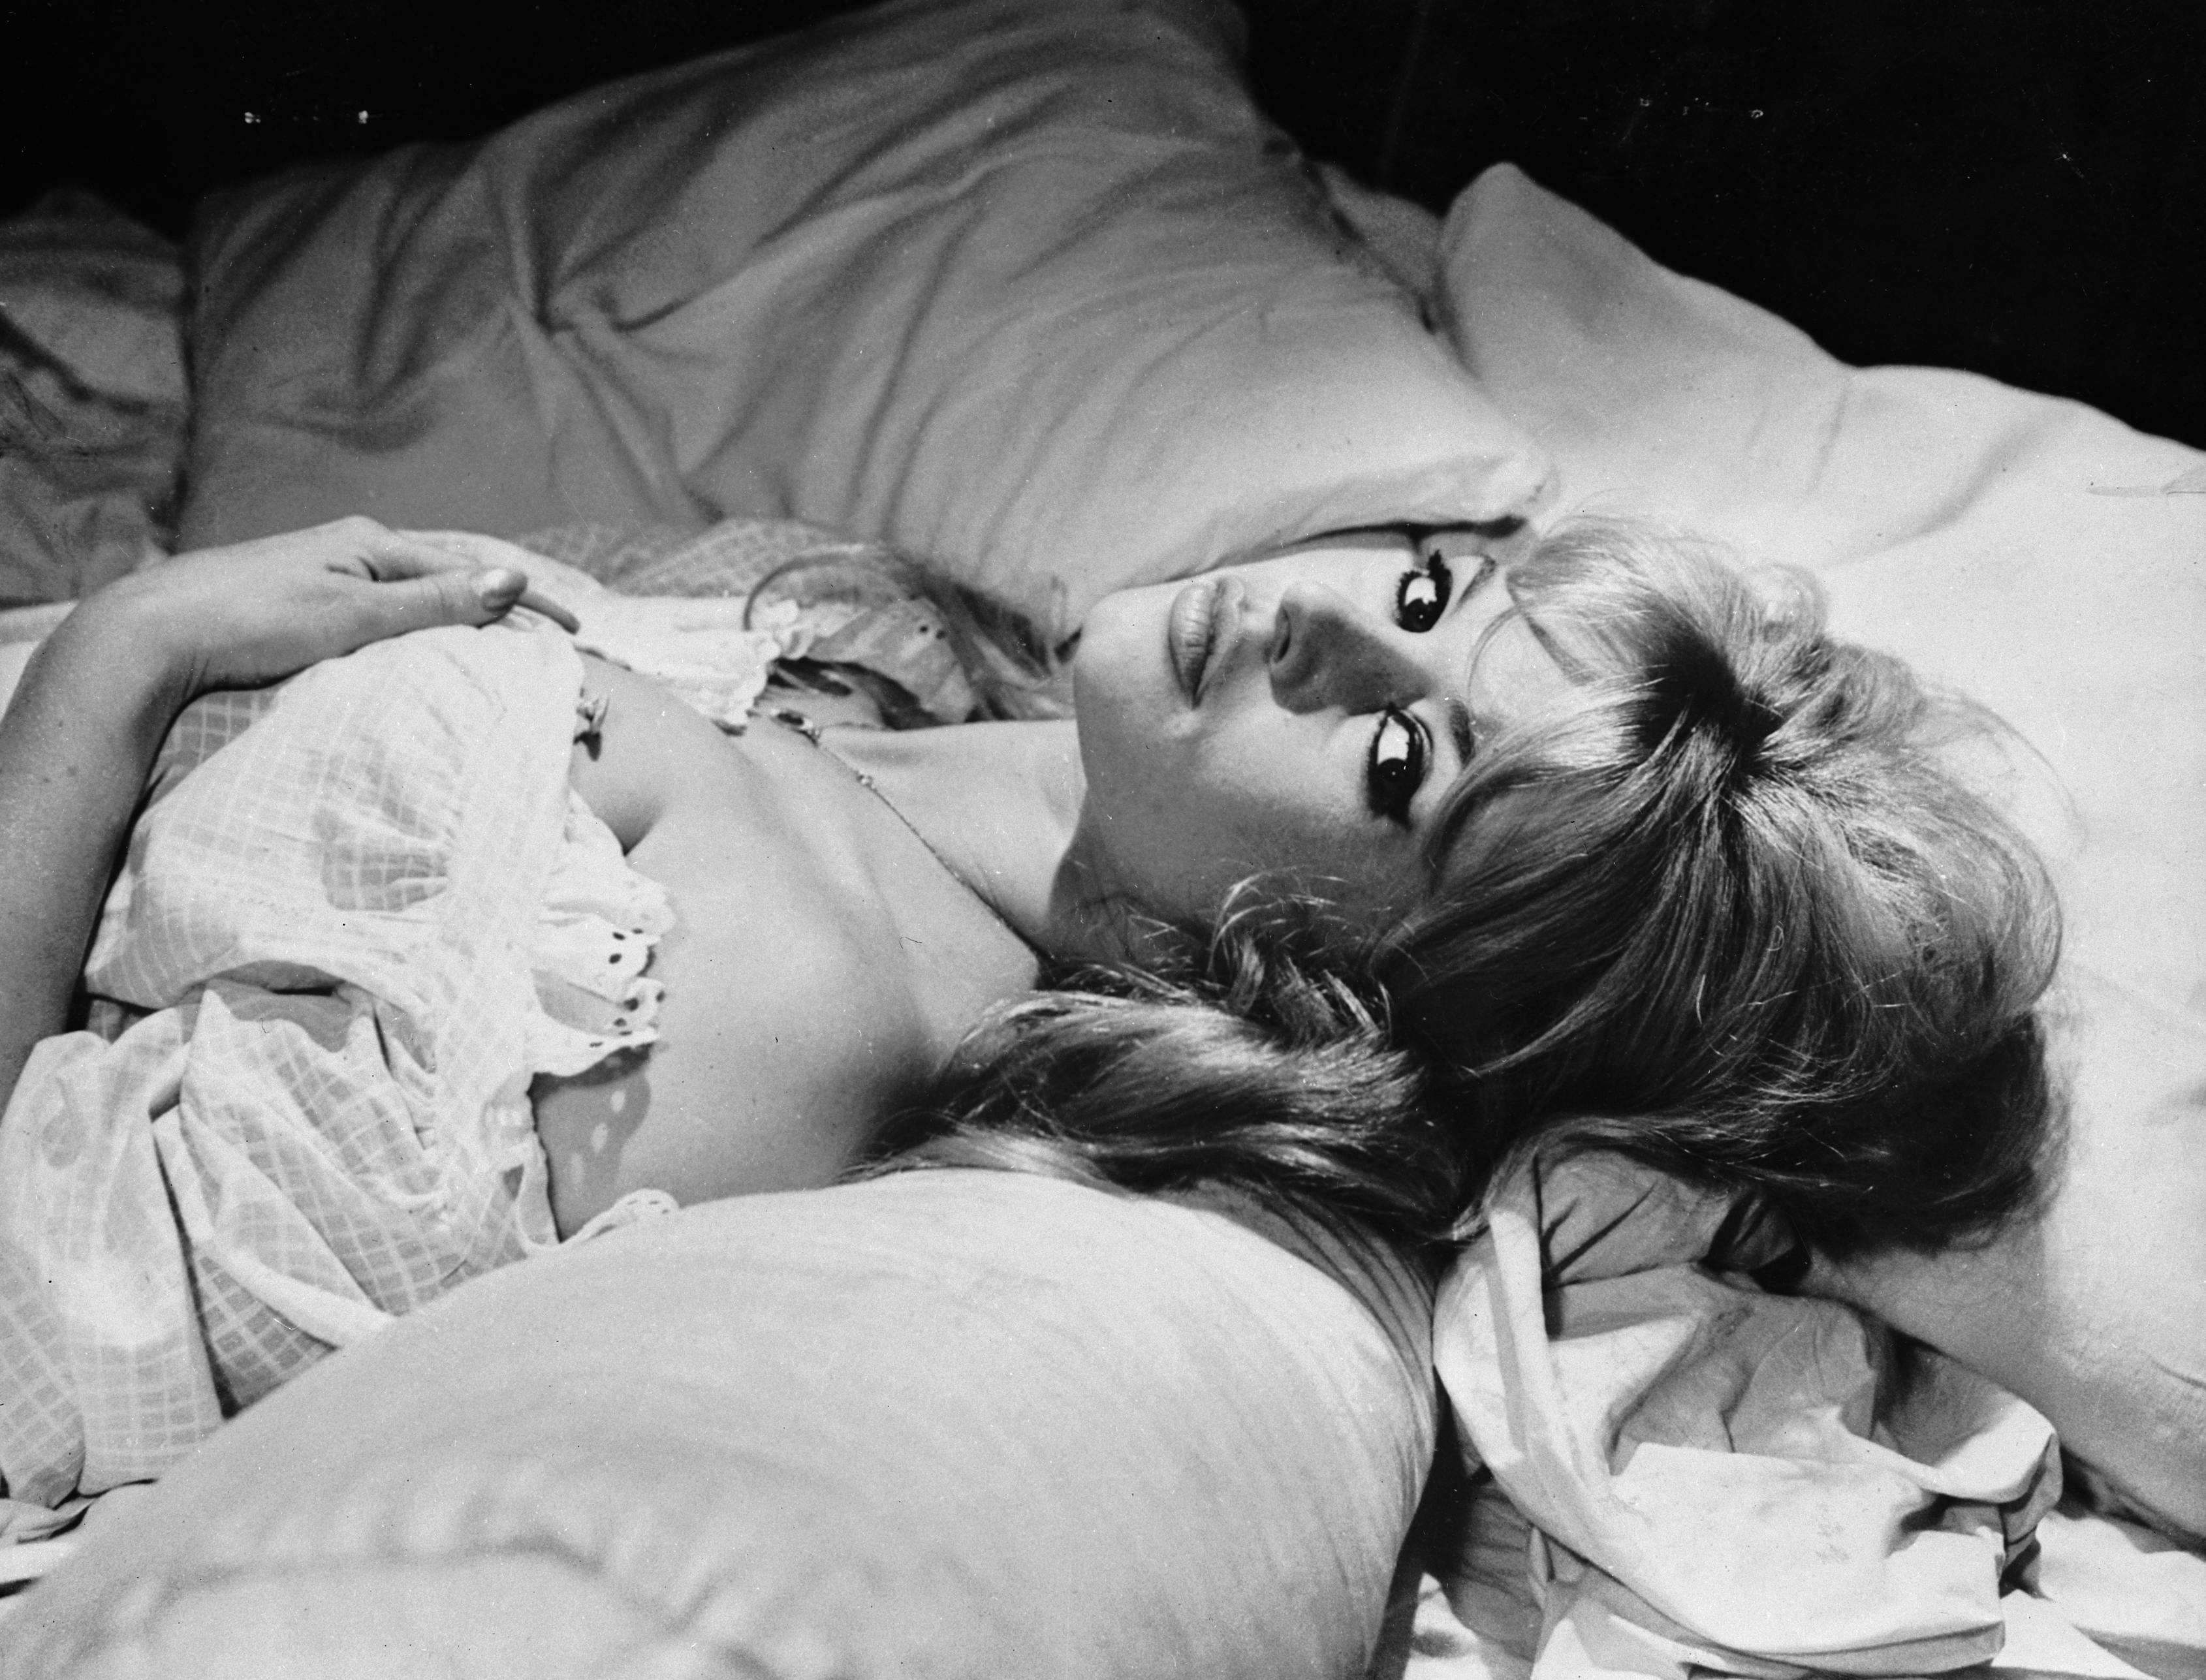 black & white;format landscape;female;film;sex symbol;film actress;personality;french;key fs 14862-;key p/bardot/brigitte pillow cushion furniture bed person female bedroom indoors room blanket